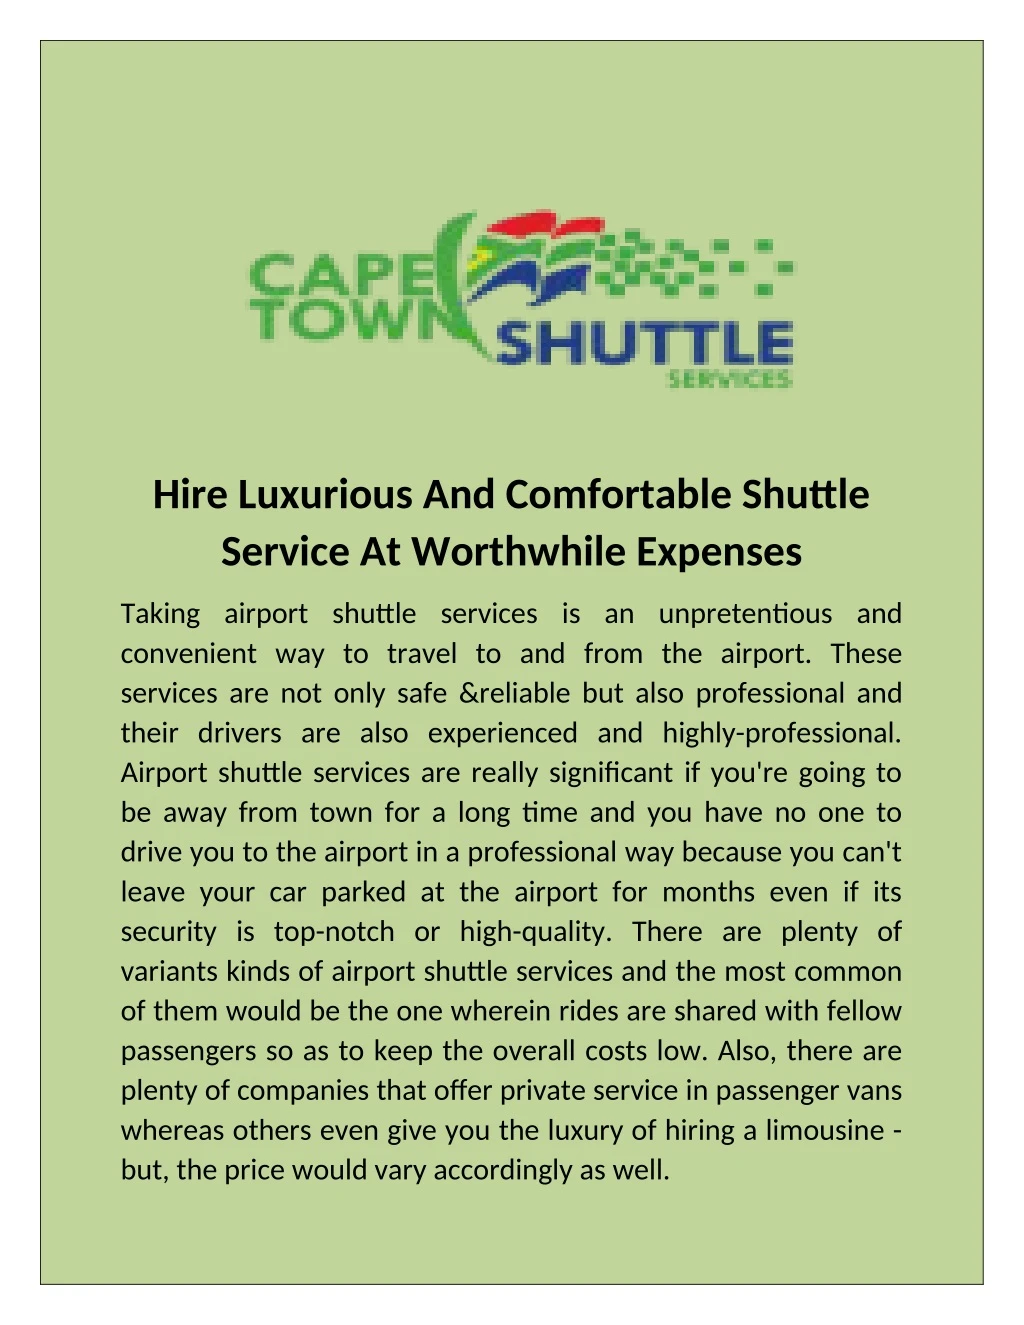 hire luxurious and comfortable shuttle service